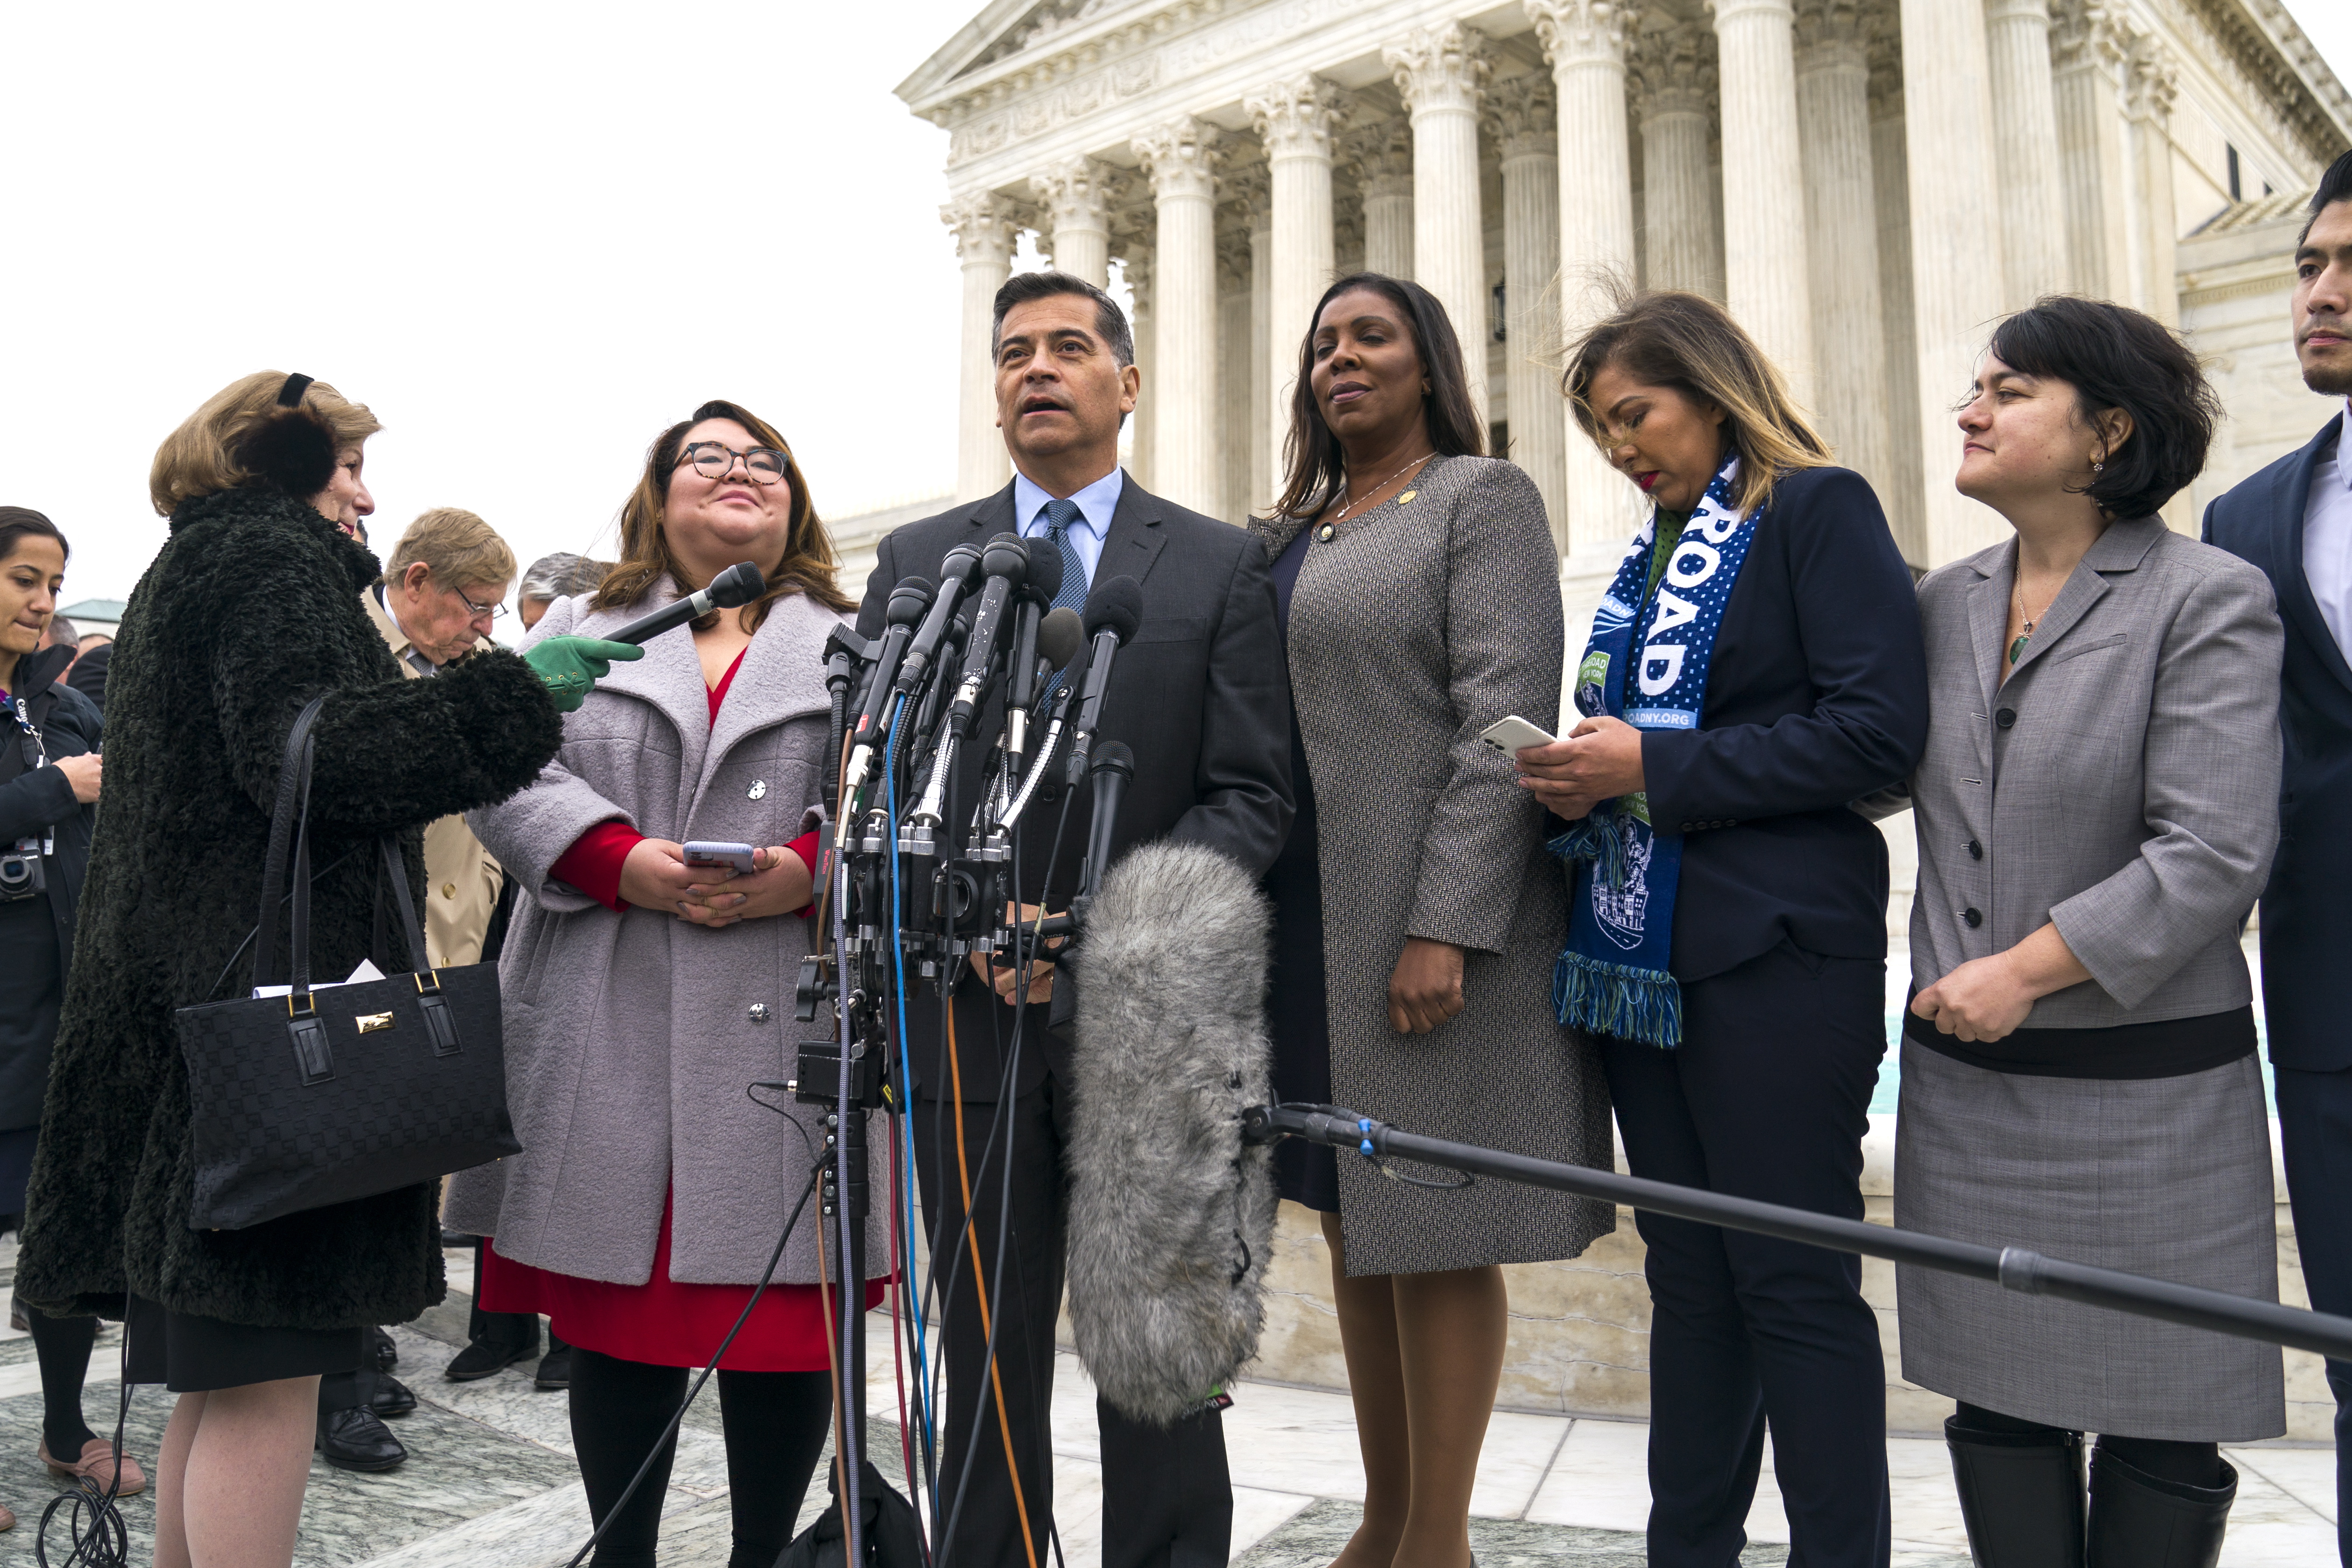 epa07991468 Attorney General of California Xavier Becerra (C-L) and Attorney General of New York Letitia James (C-R) gather with plaintiffs of the DACA (Deferred Action for Childhood Arrivals) case outside the US Supreme Court after the justices heard oral arguments on whether the Department of Homeland Security's bid to bring an end to the DACA policy is lawful in Washington, DC, USA, 12 November 2019. The Obama-era program allows more than 700,000 immigrants who came here as children to remain in the country legally.  EPA/JIM LO SCALZO